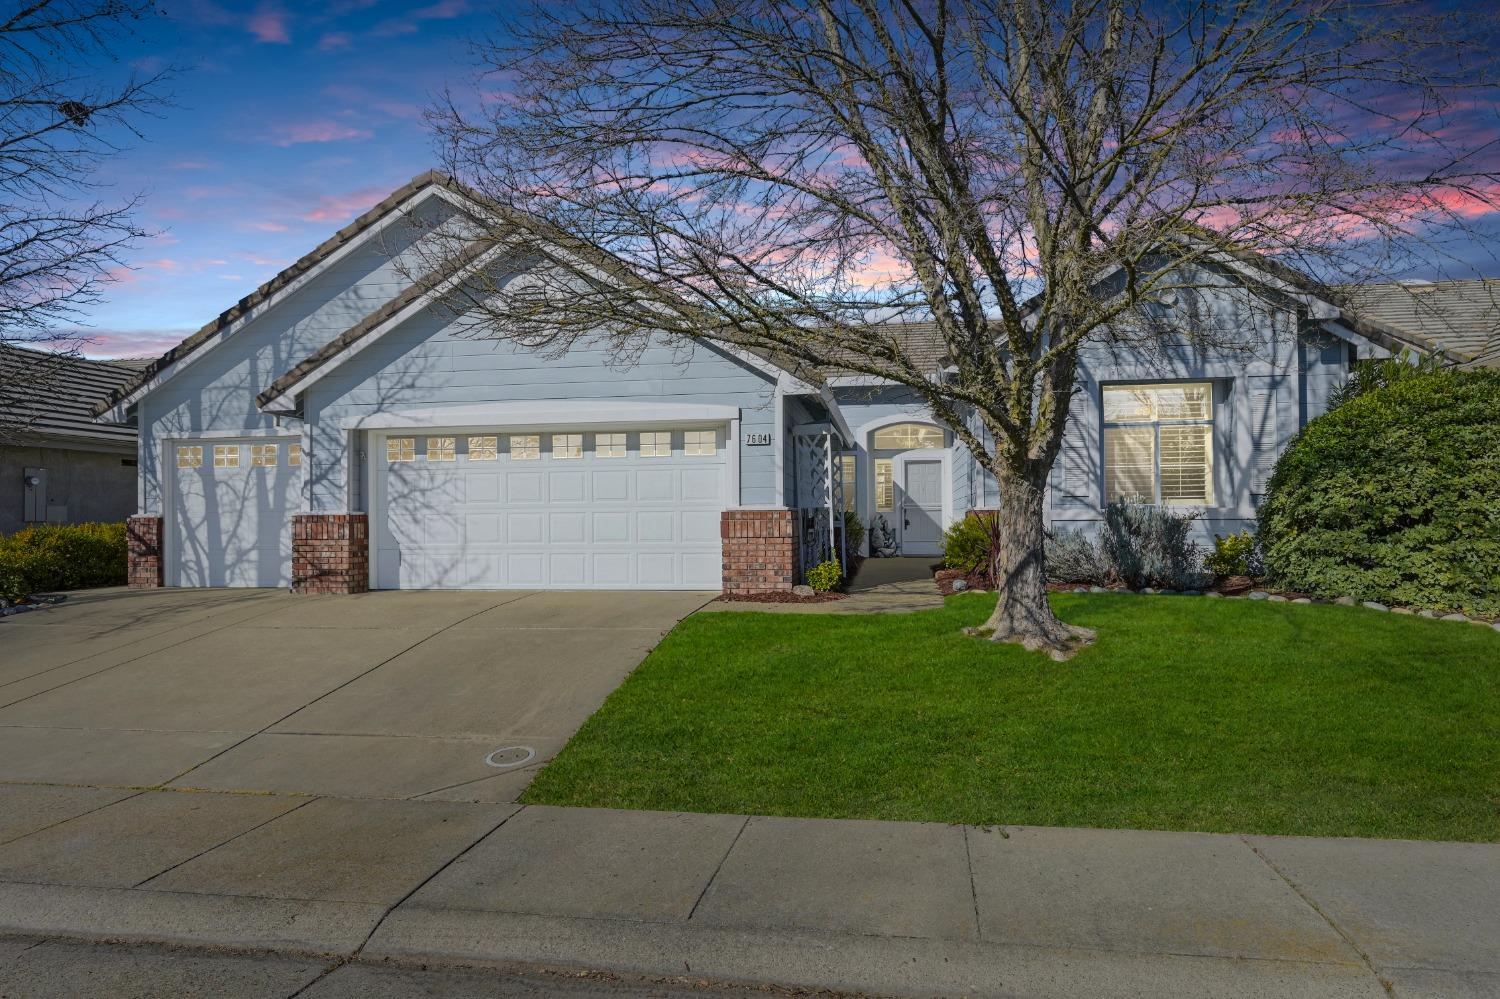 Photo of 7604 Goose Meadows Wy in Roseville, CA